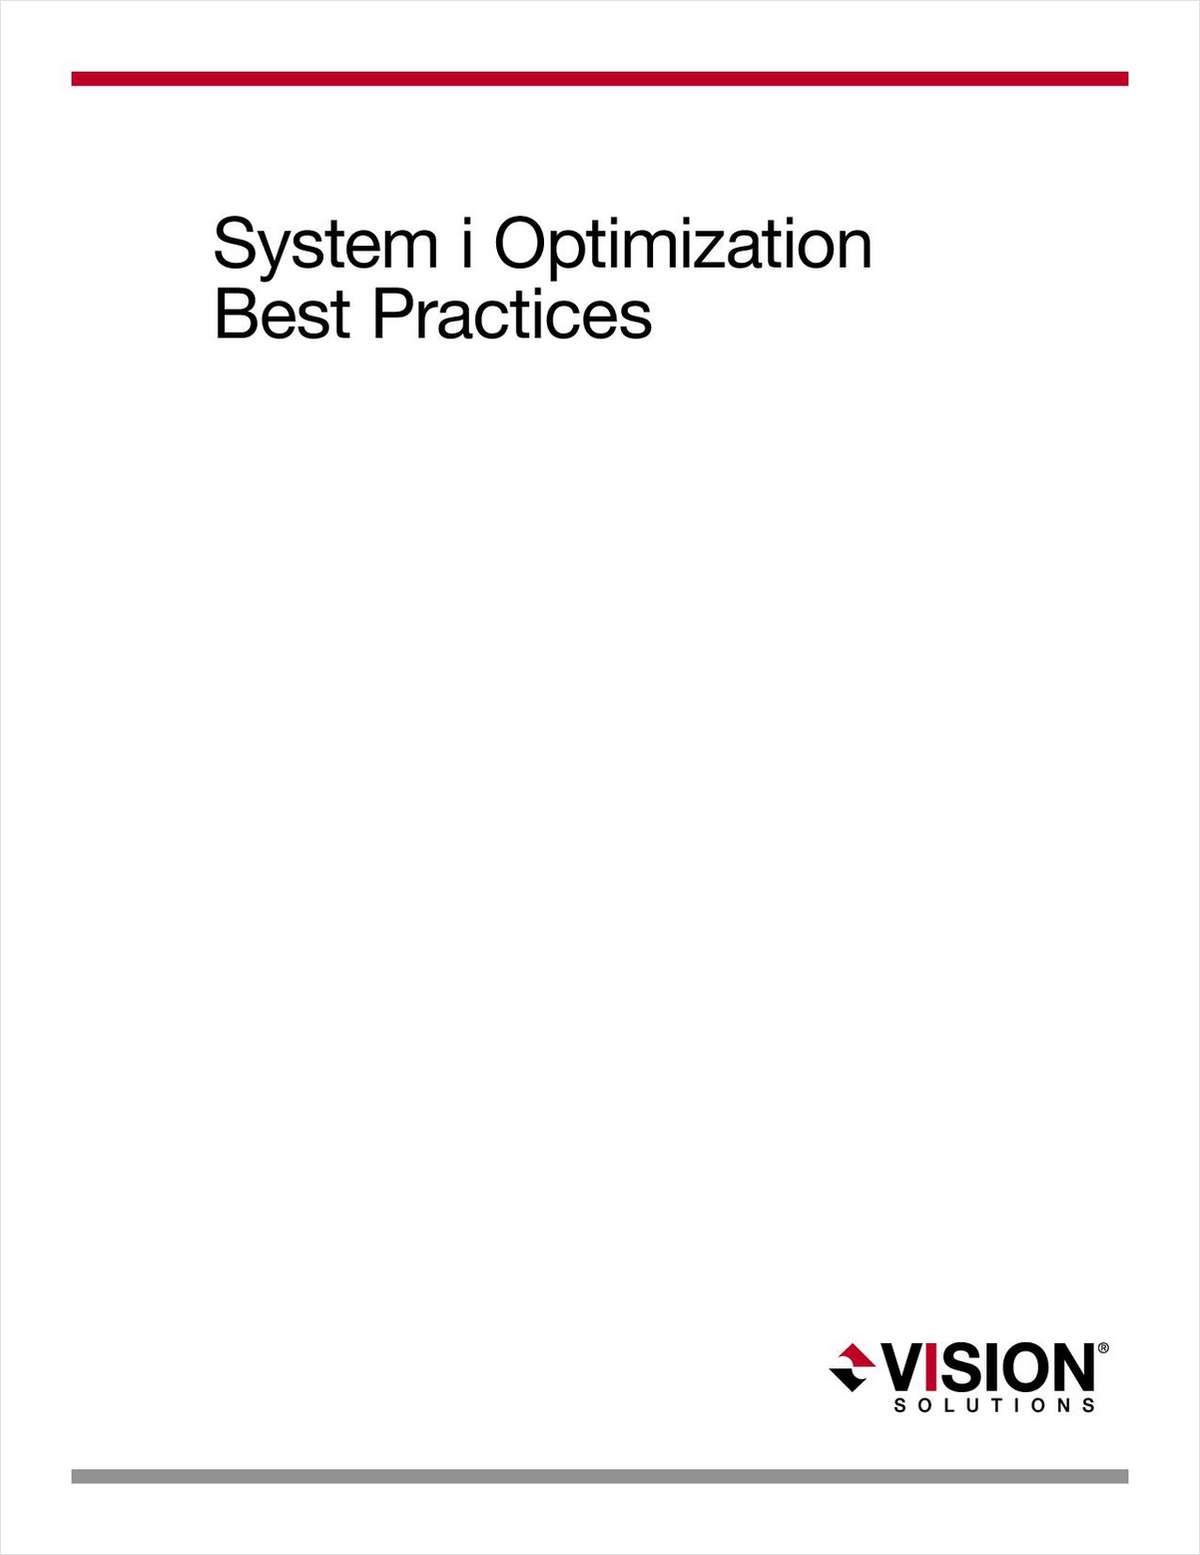 System i (AS/400) Optimization Best Practices